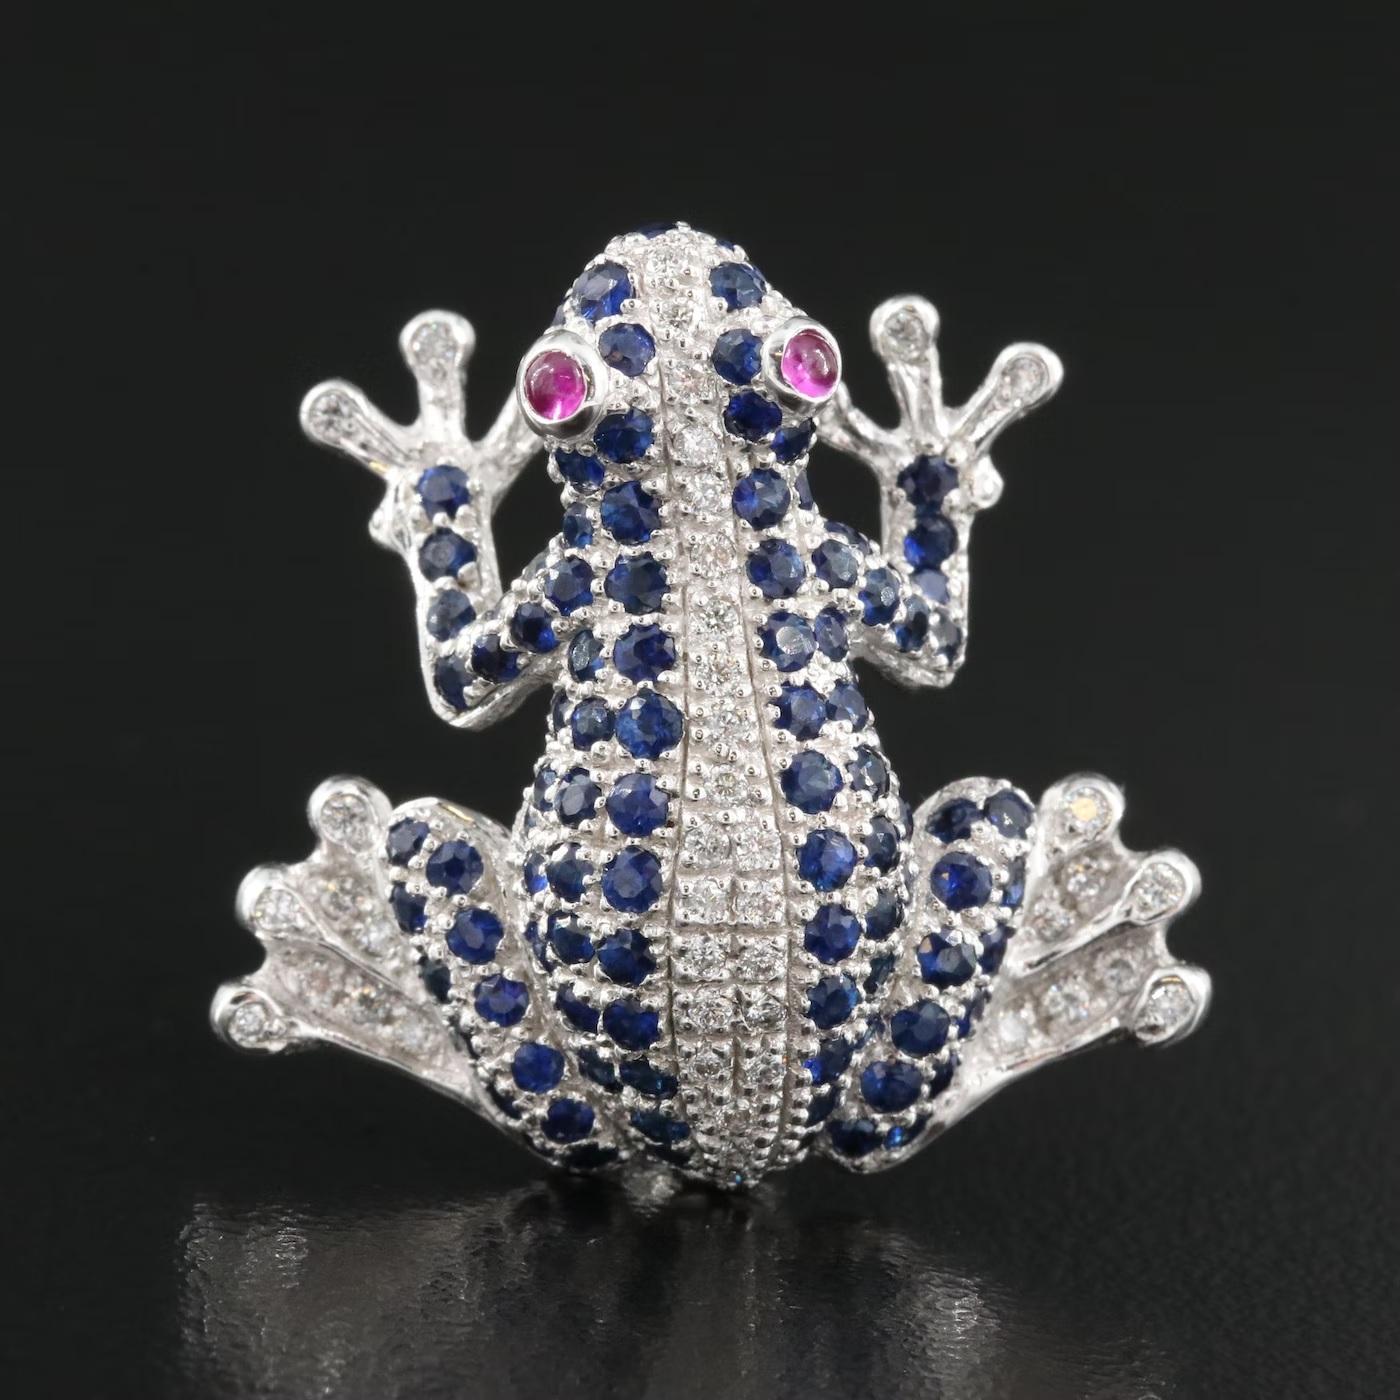 Designer Levian Pendant brooch (can be worn both ways with dedicated pin for the brooch, it can also be used as a pendant)

NEW with tags, Tag Price $4950

14K solid White Gold

Diamond, Blue Sapphire and Ruby, excellent quality natural

Very Heavy,